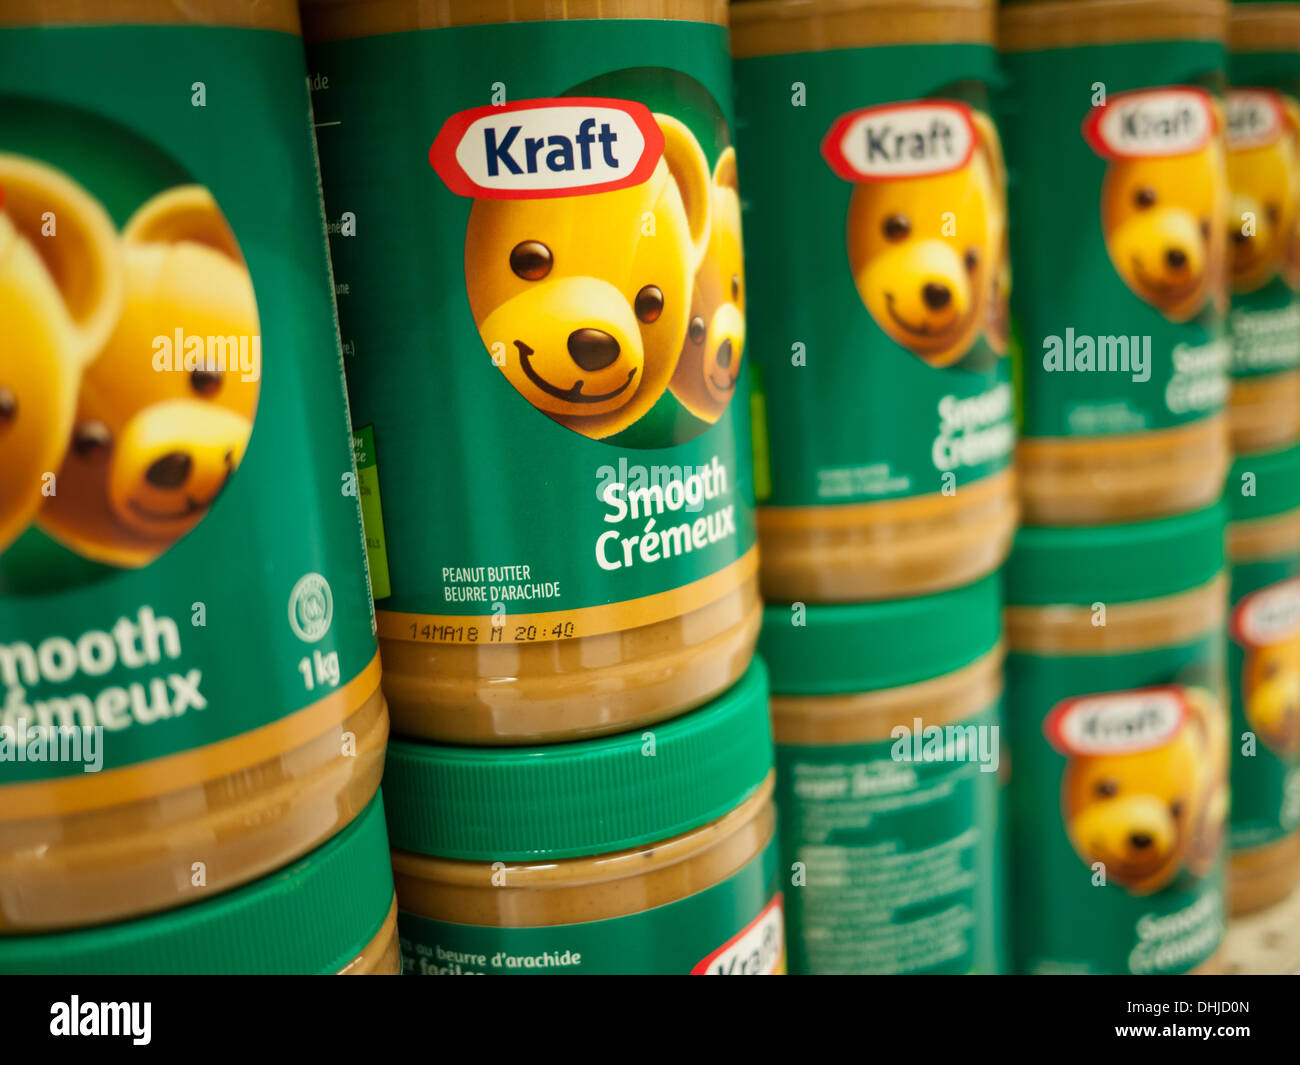 Jars of Kraft smooth peanut butter in a supermarket. Canadian English and French packaging is shown. Stock Photo